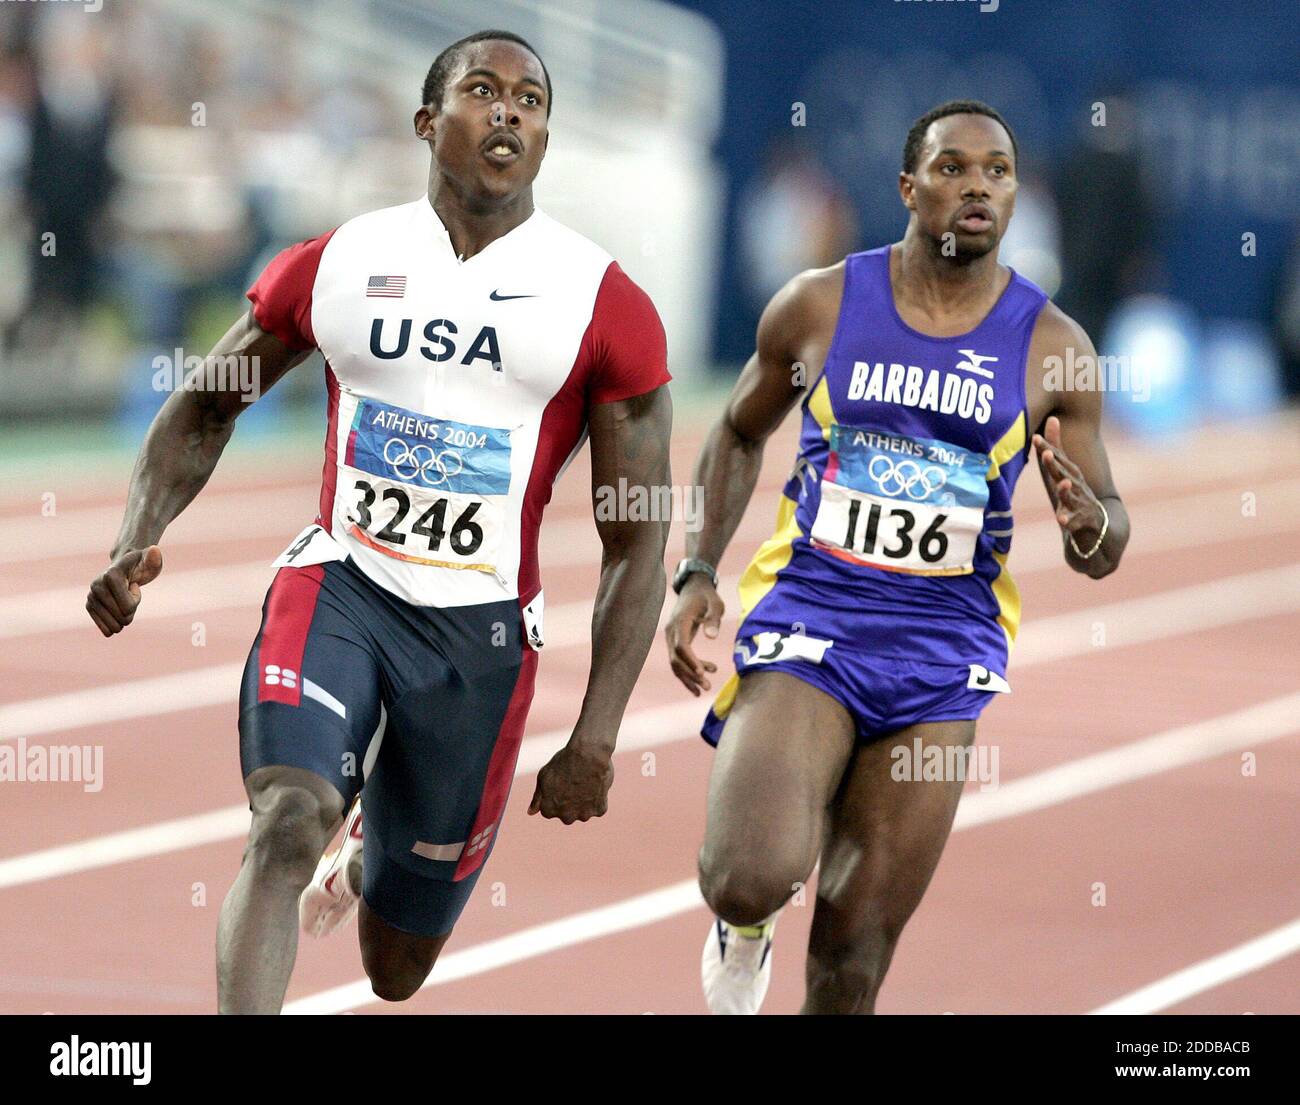 NO FILM, NO VIDEO, NO TV, NO DOCUMENTARY - Shawn Crawford of the United States, left, and Obadele Thompson of Barbados look for their times after a heat of the 100 meters at the 2004 Olympic Games on Saturday, August 21, 2004. Photo by Nhat V. Meyer/San Jose Mercury News/KRT/ABACA Stock Photo